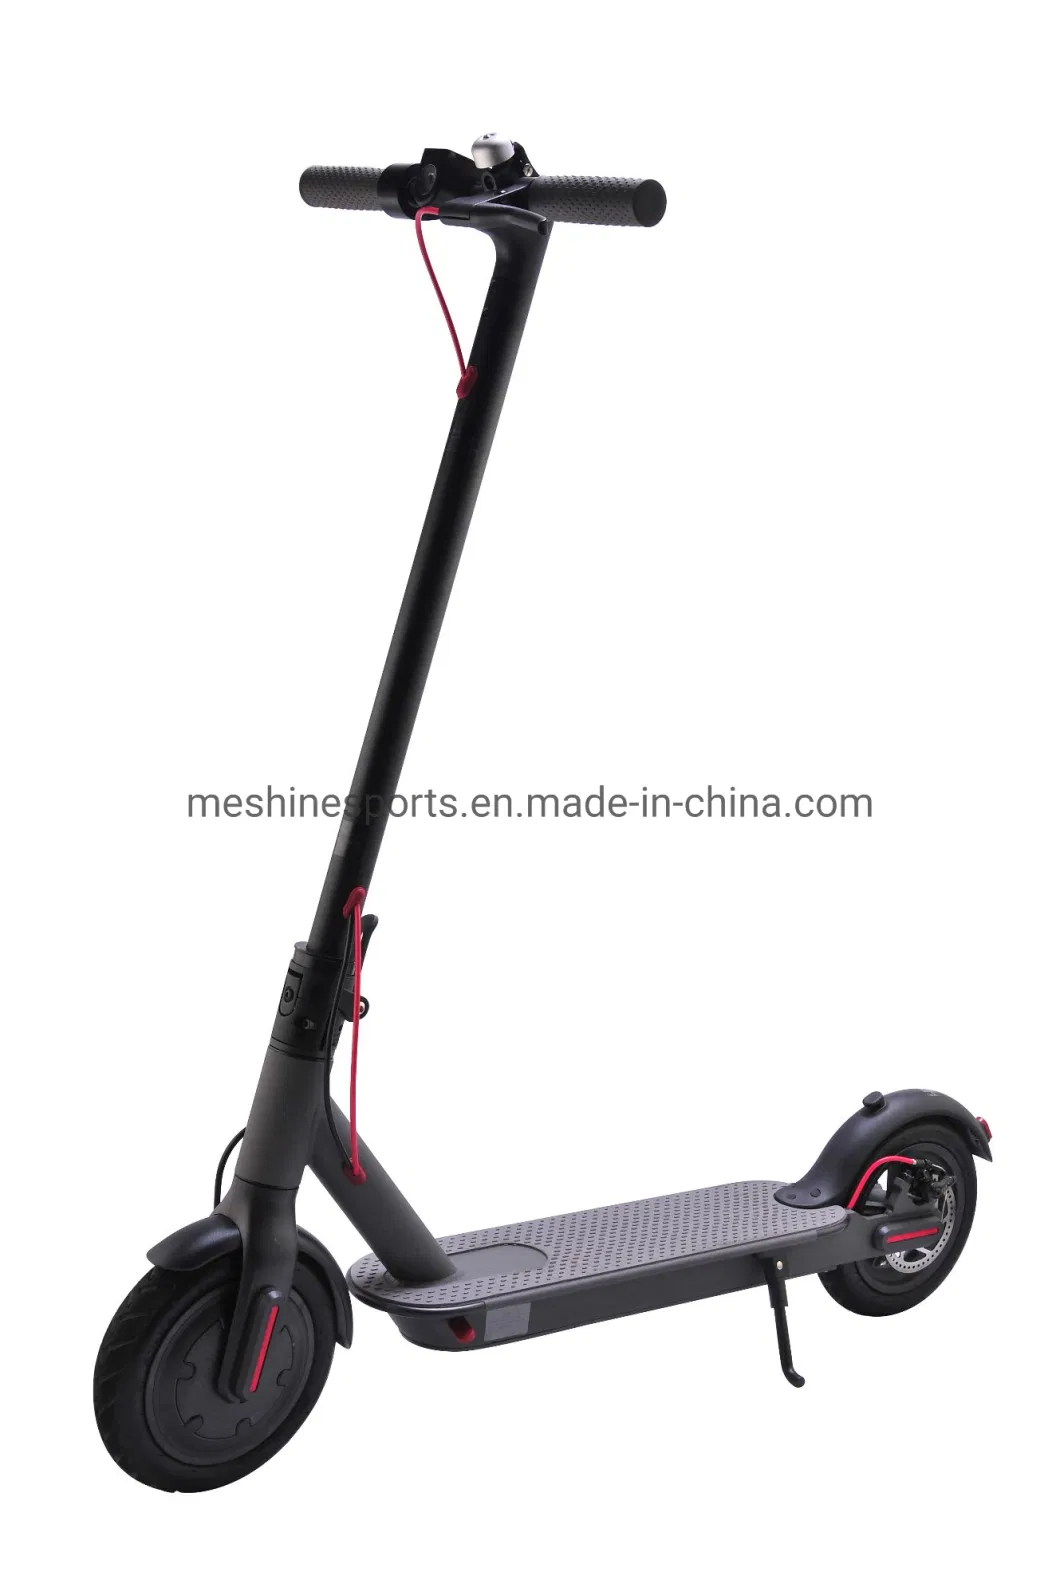 Self Balancing Folding Electric Mobility Vehicle Motorcycle Bike E-Scooter E Scooter for Adult